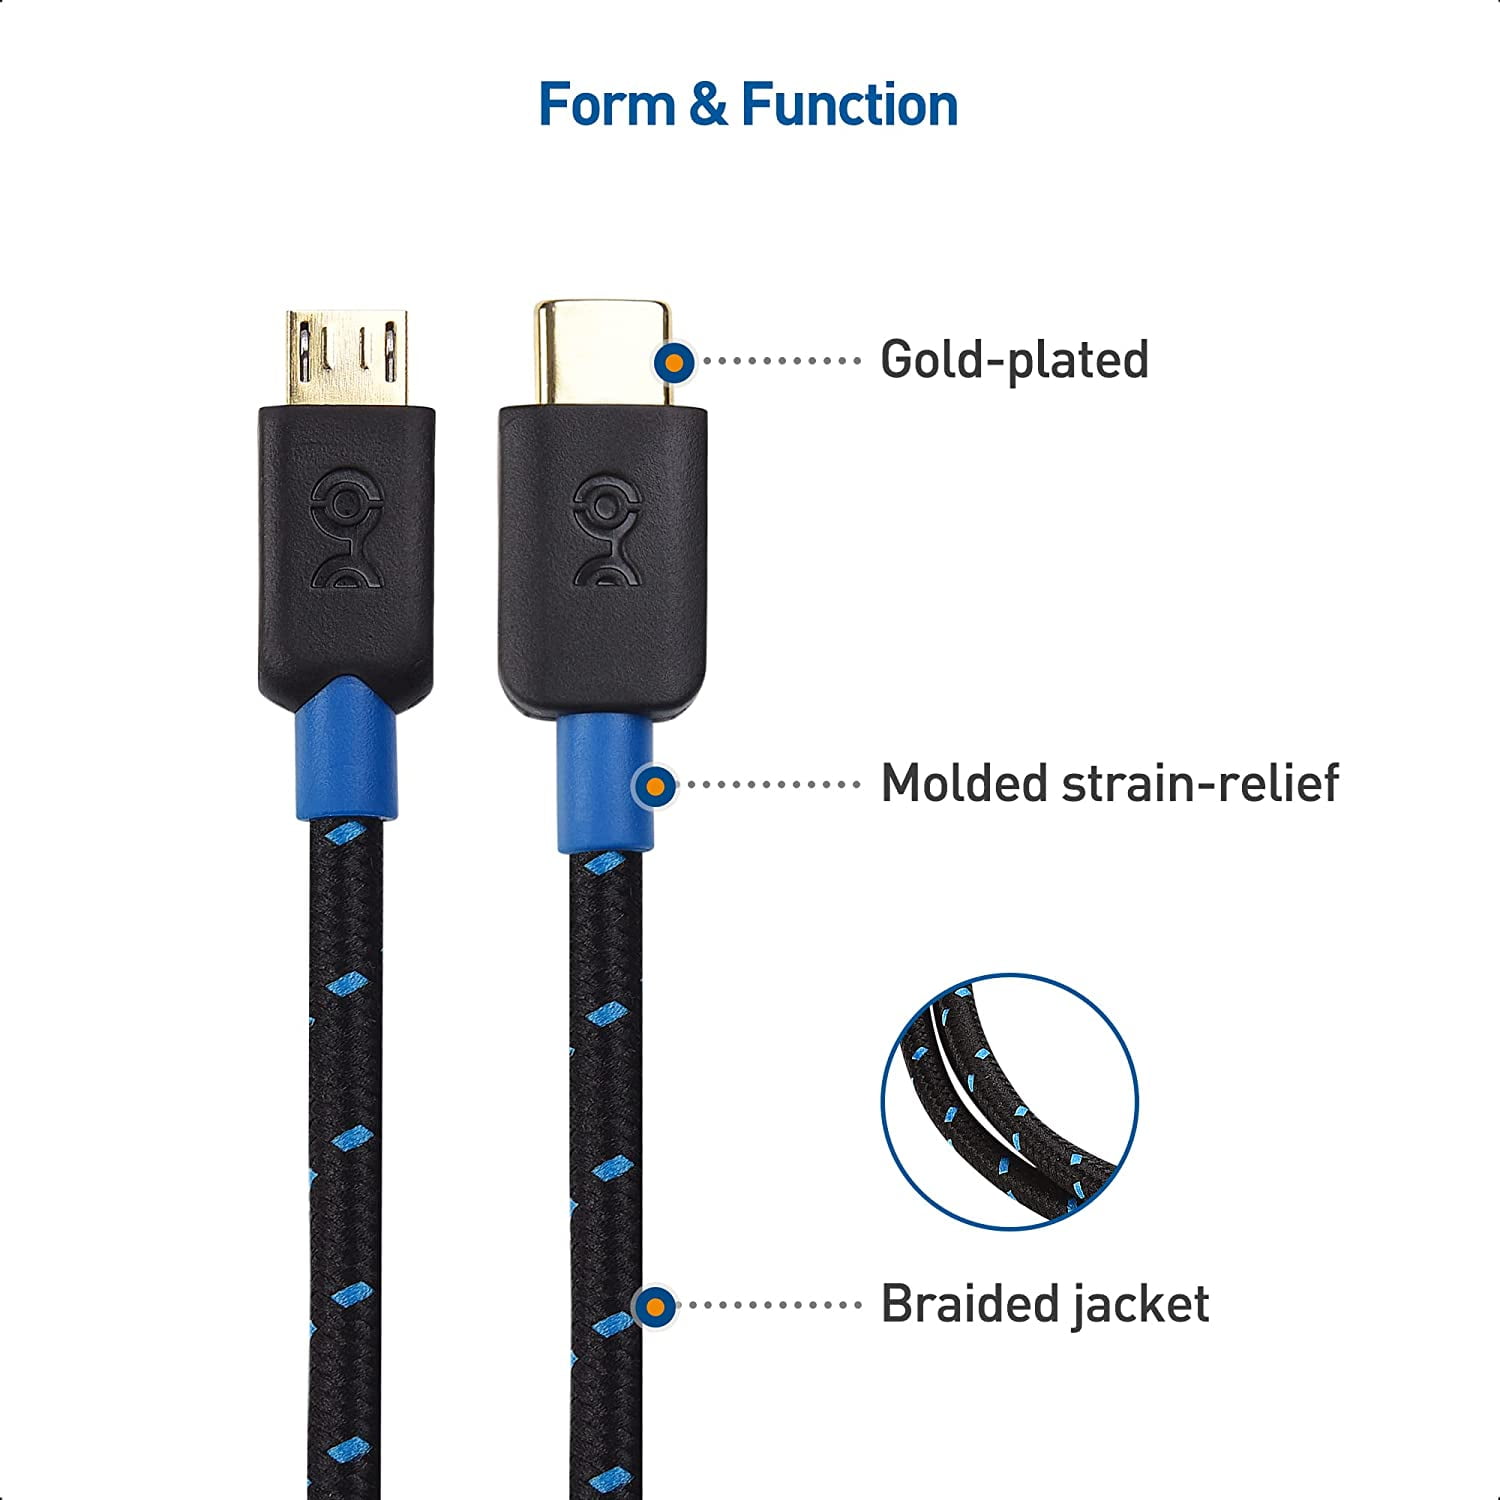 Cable Matters Cable Matters USB C to Micro USB Cable (Micro USB